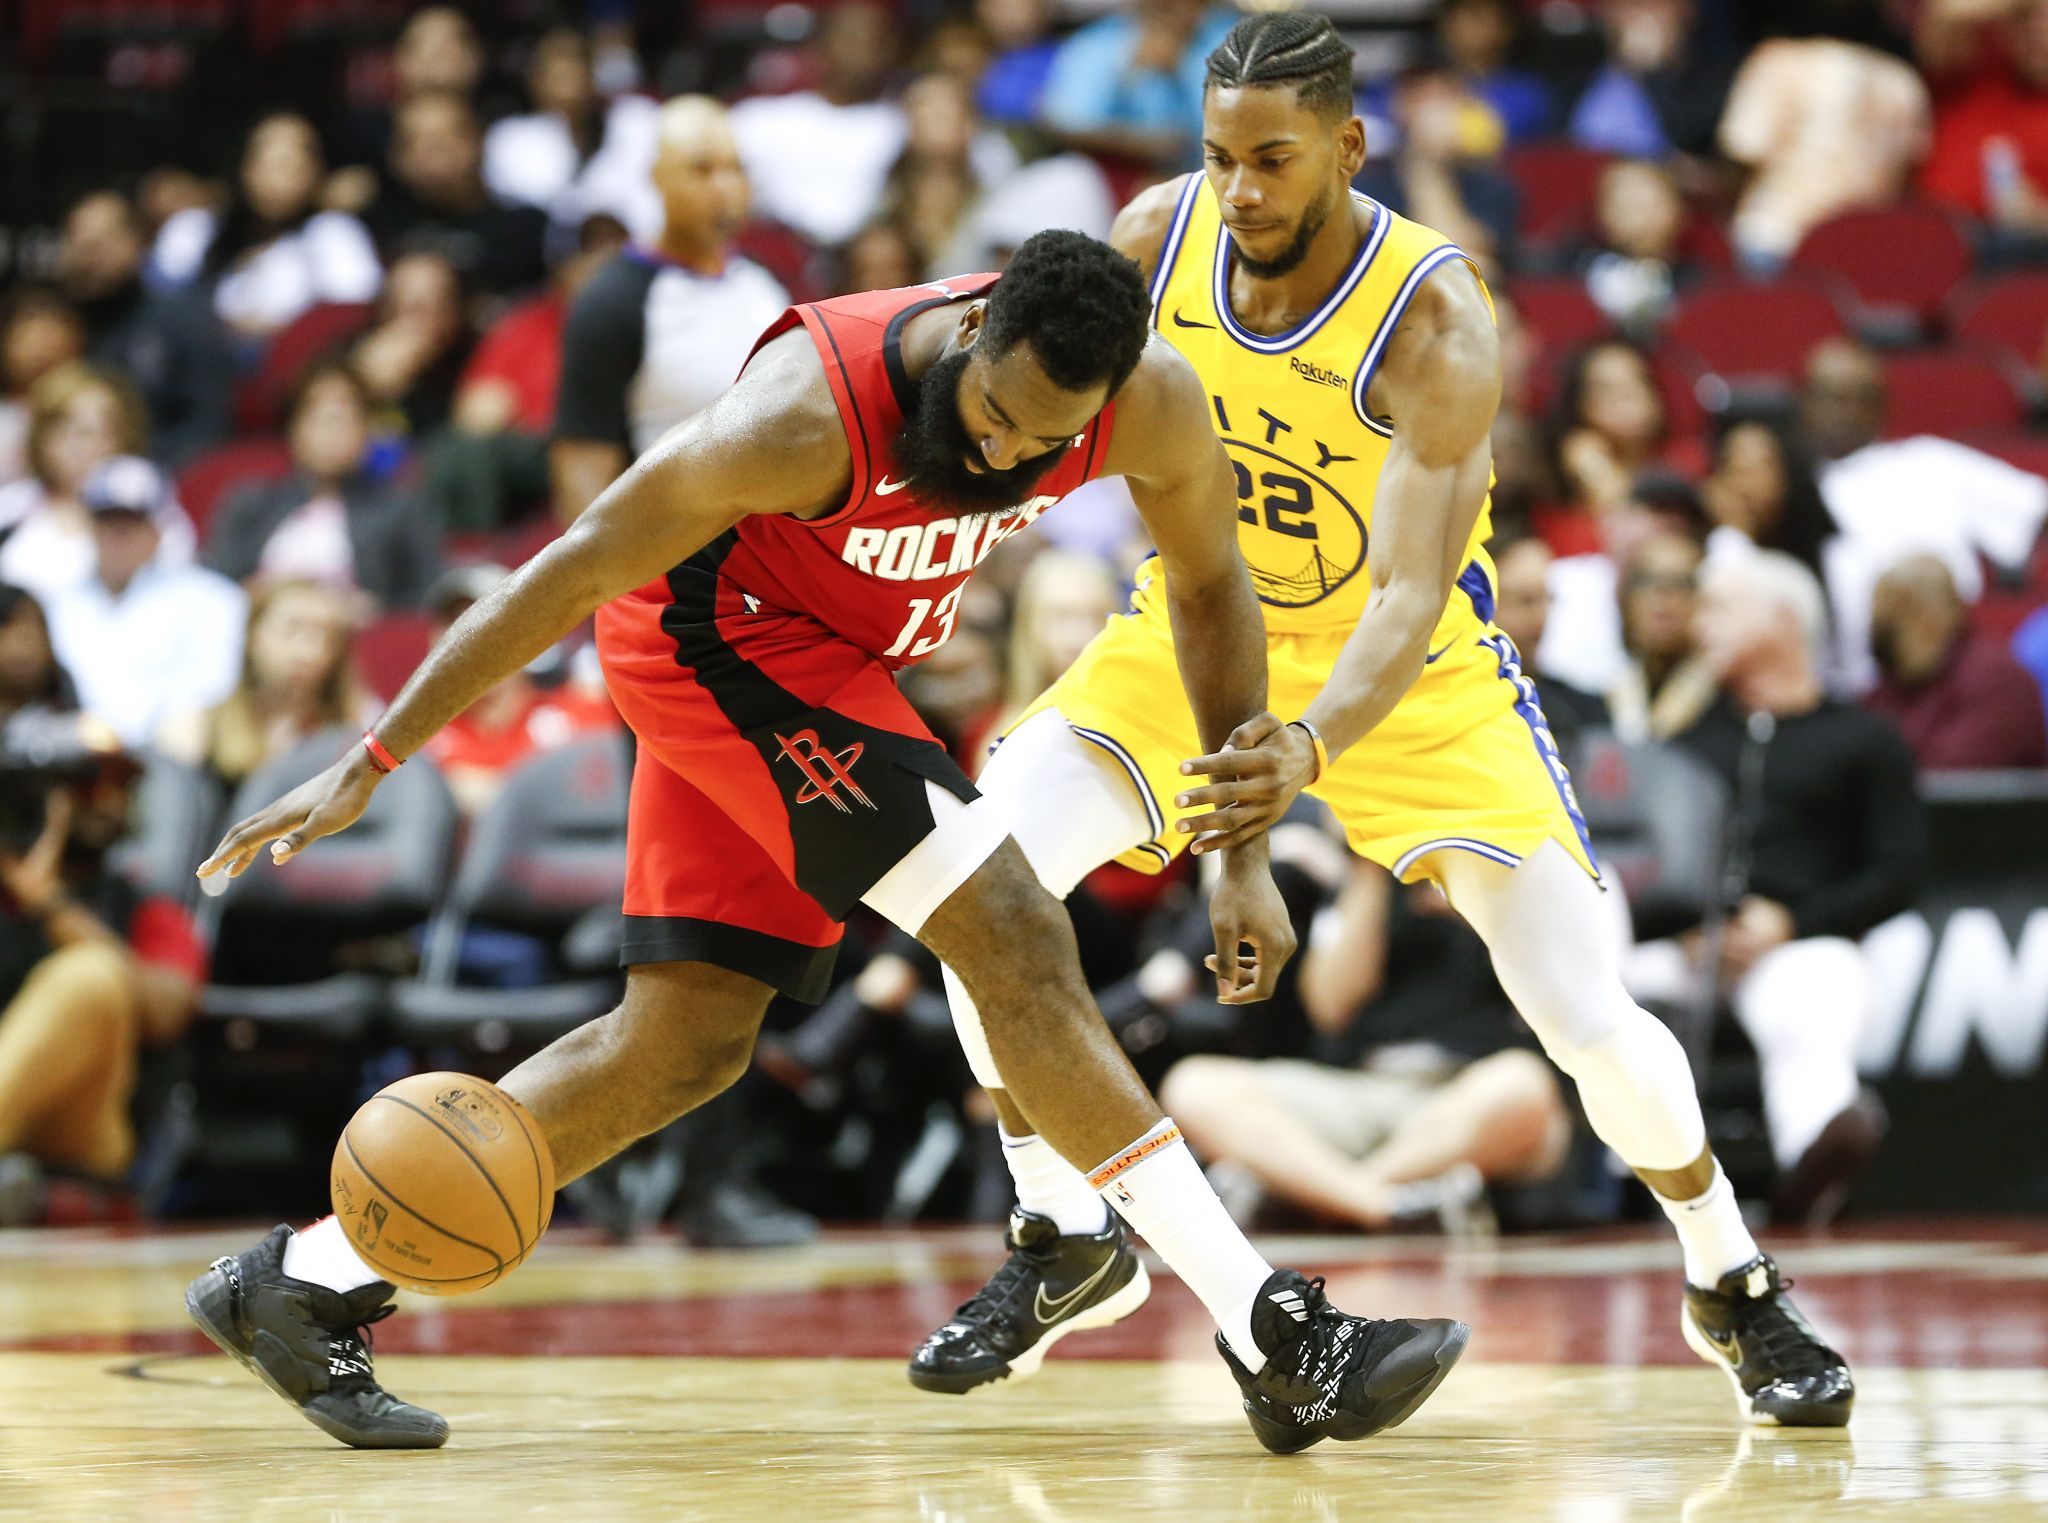 Creech: Wednesday a reminder that Rockets-Warriors rivalry isn't back yet